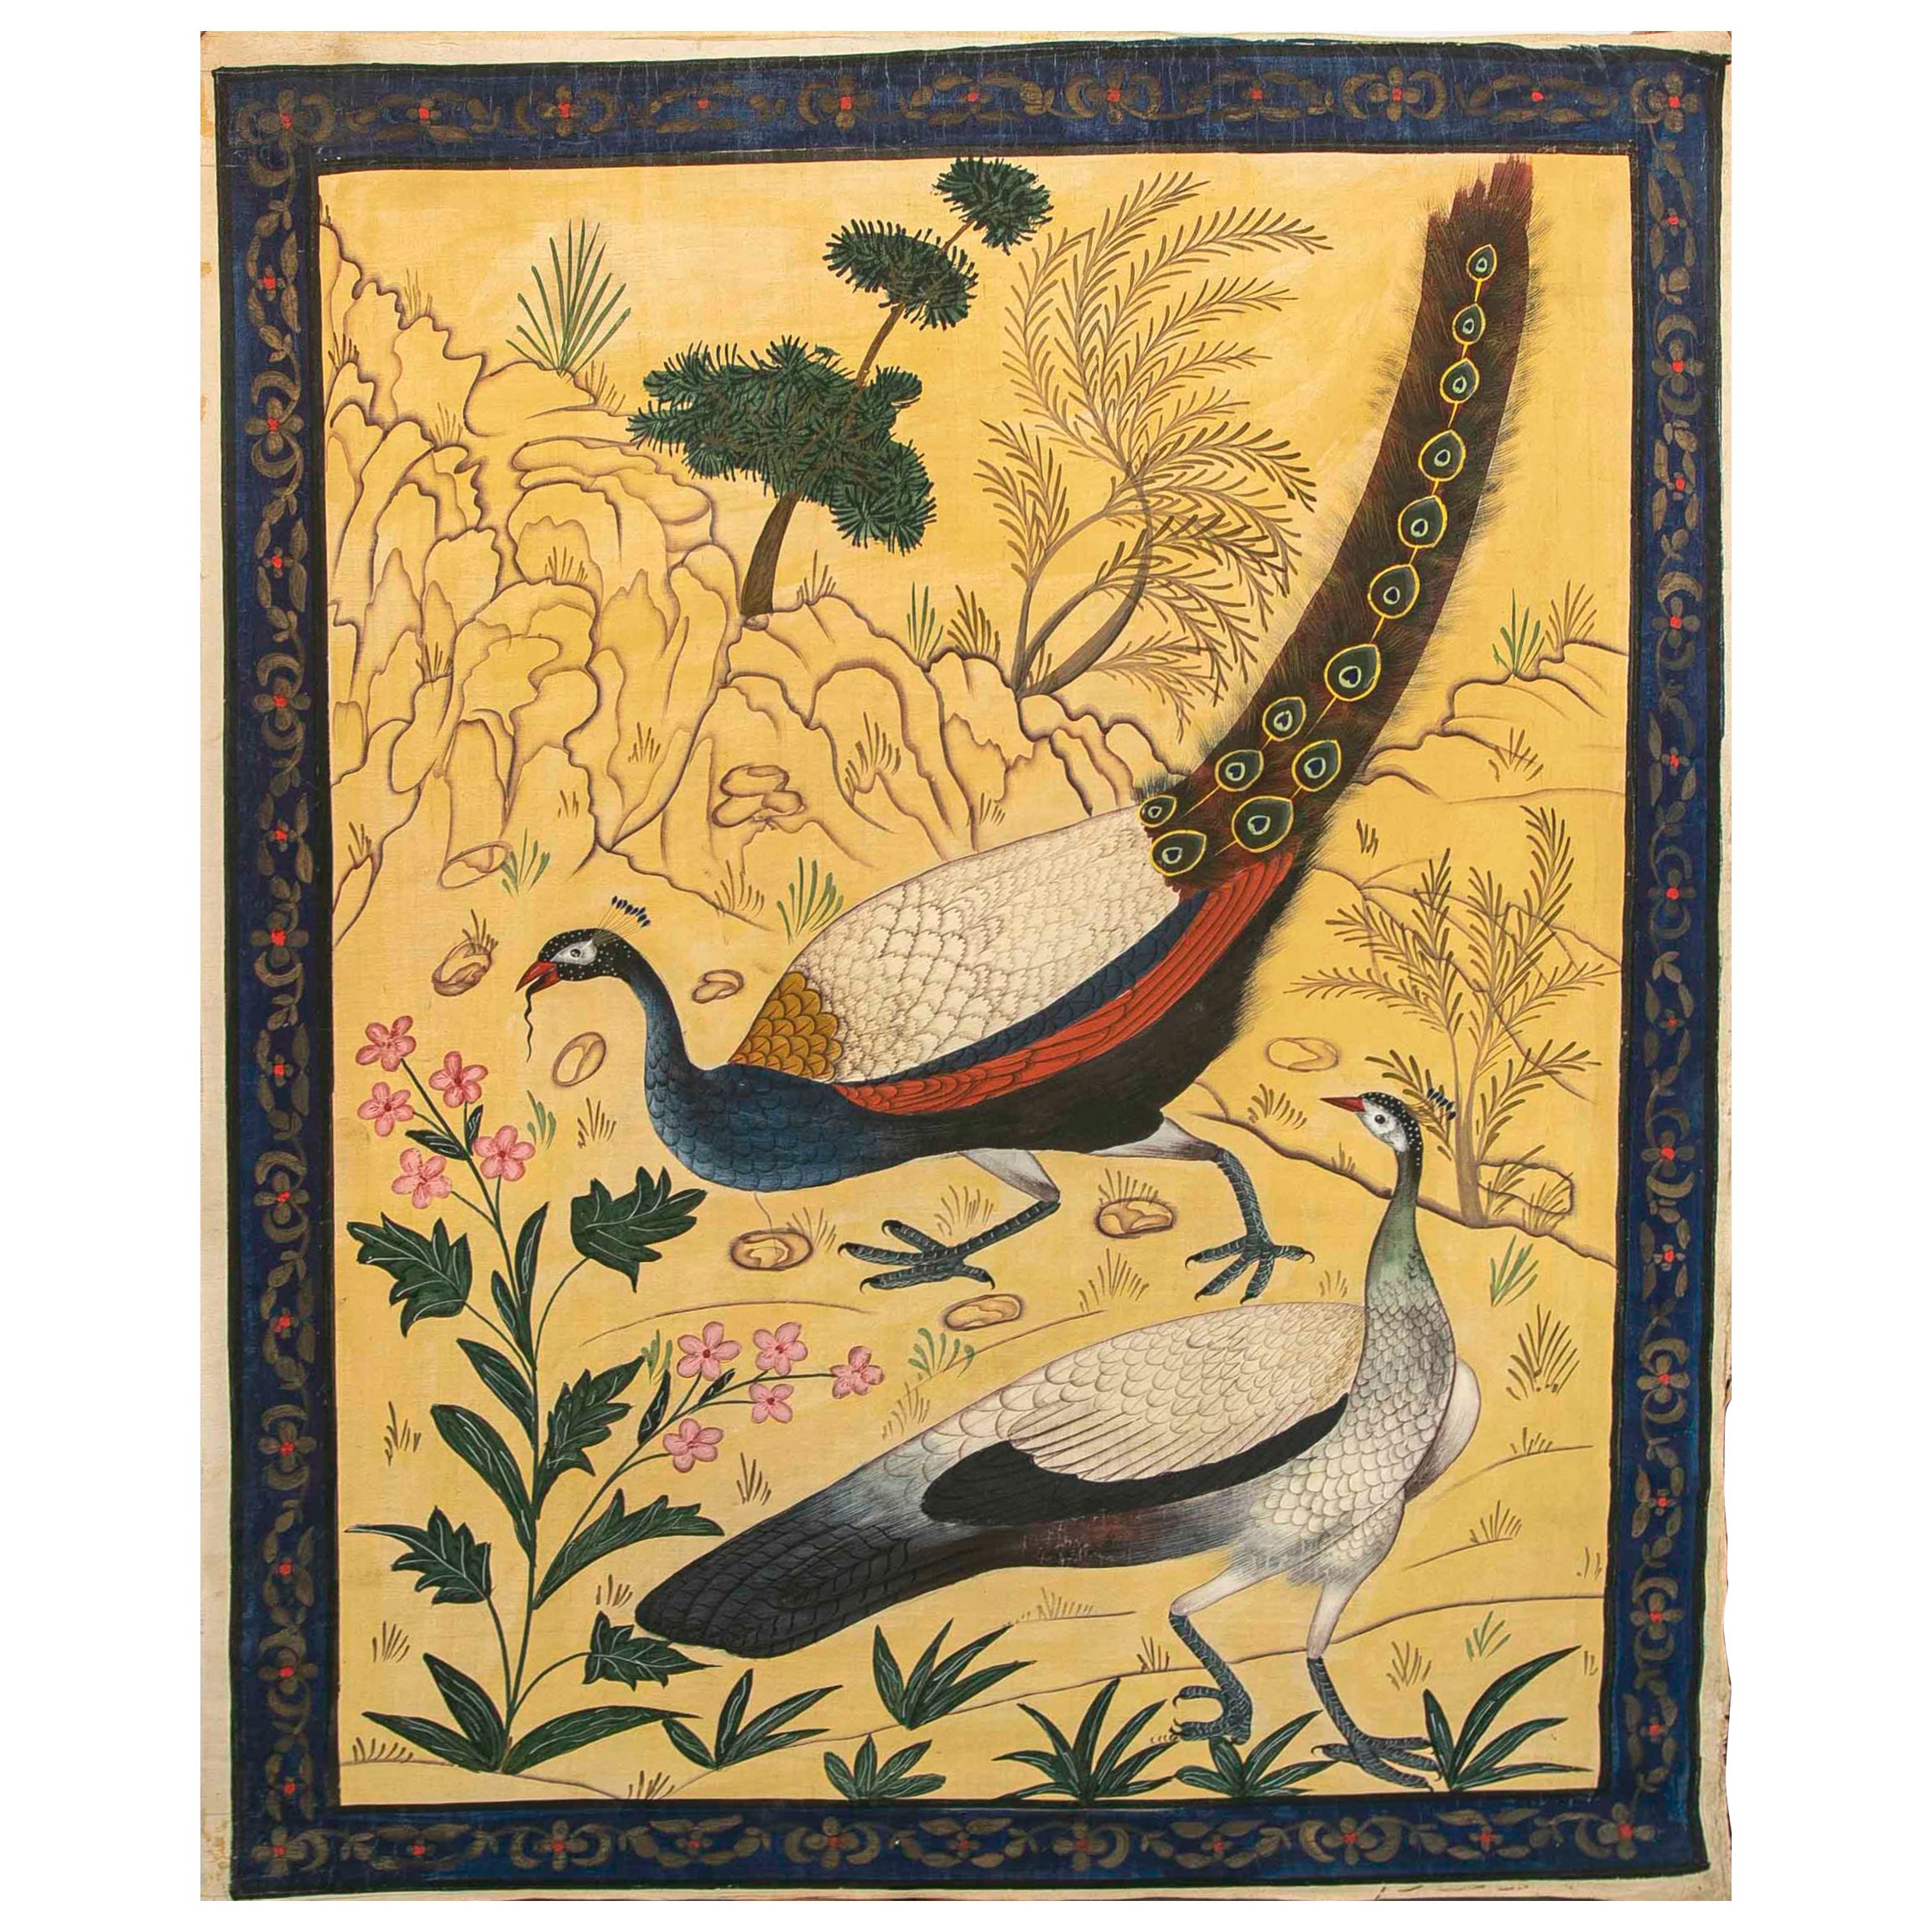 1980s Pair of Hand-Painted Peacocks on Canvas 